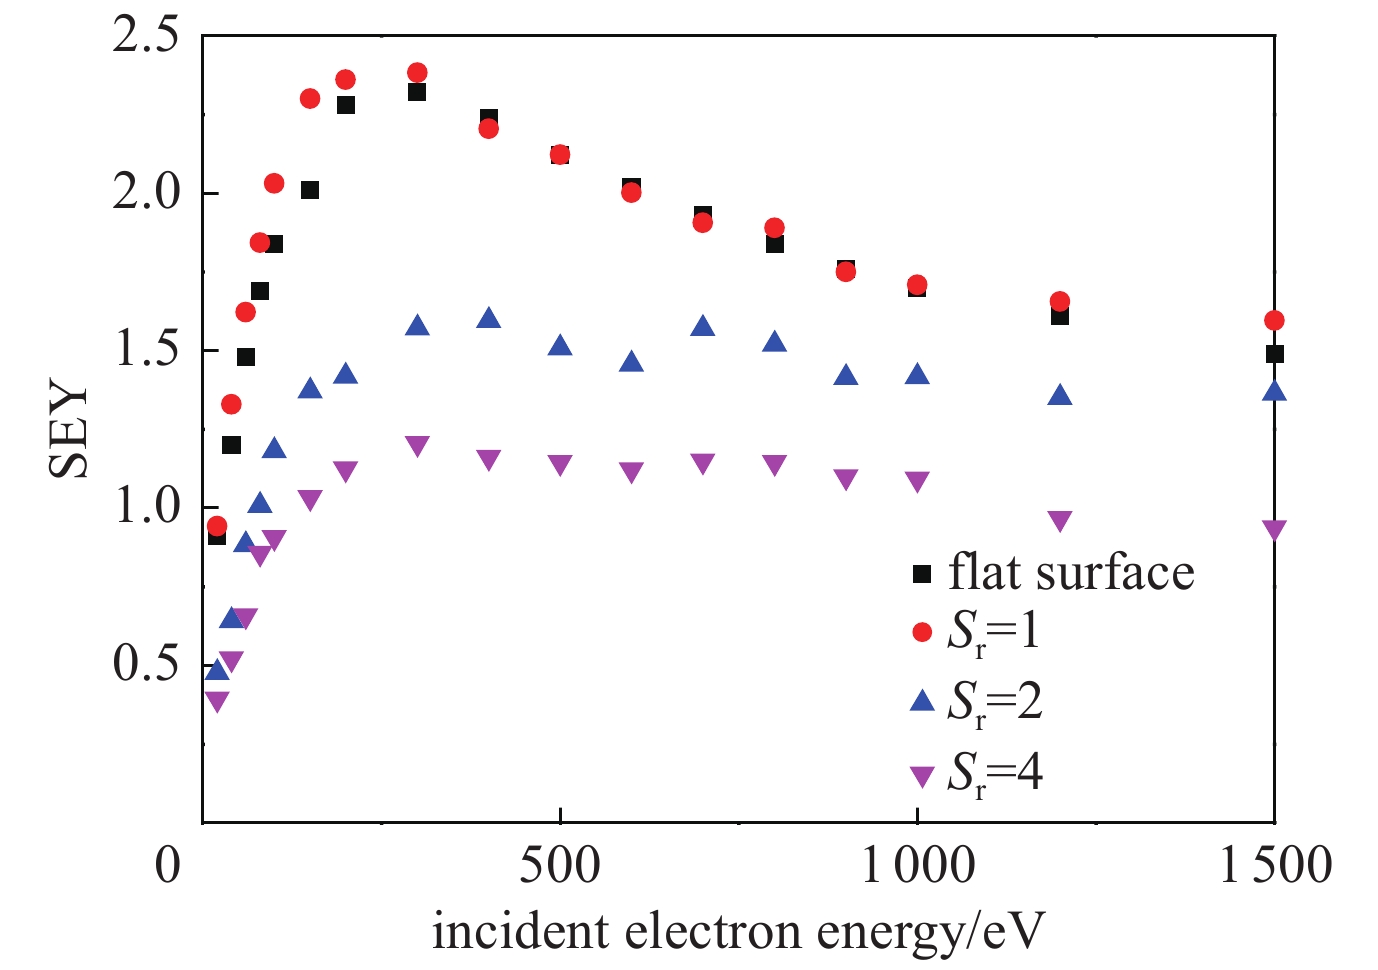 Secondary electron yields (SEYs) on the ferrite dielectric with different Sr